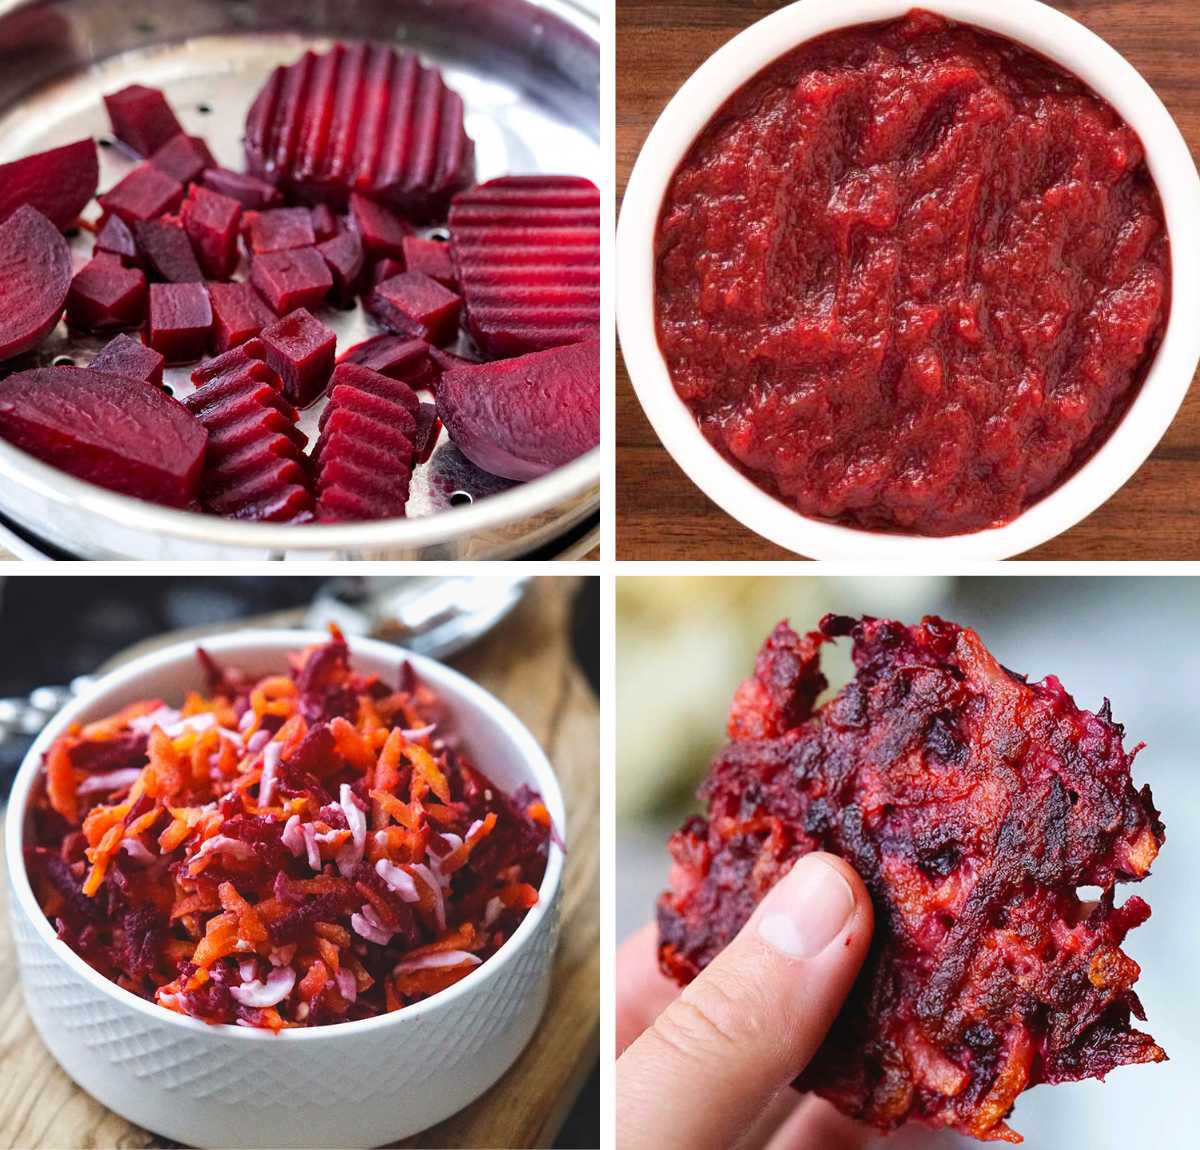 Ways to cook and prepare beets for babies.